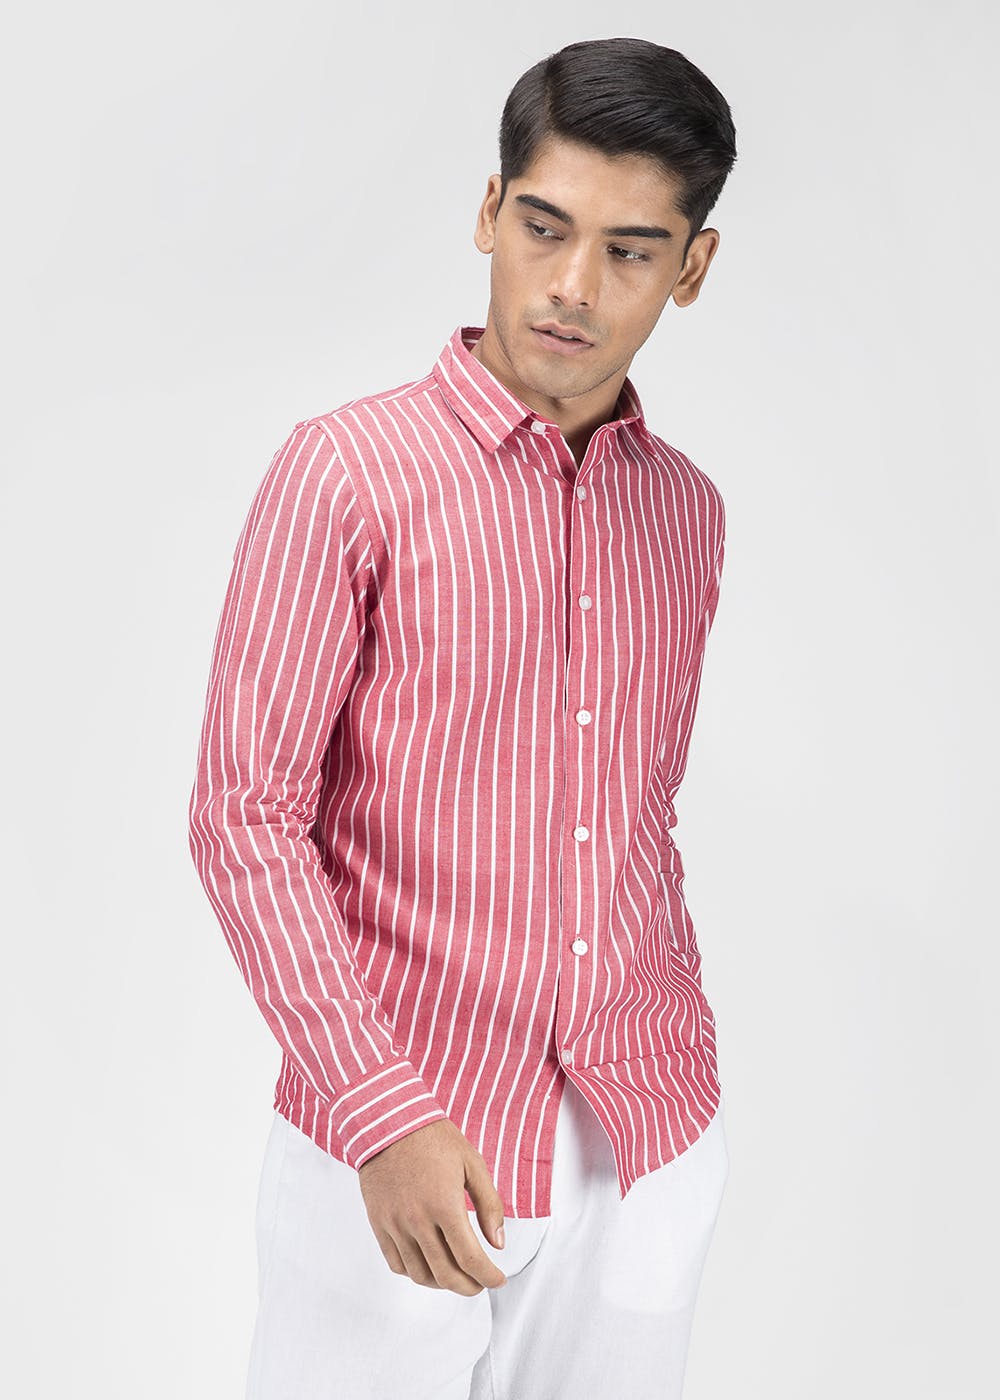 Get Contrast Pinstriped Red SLim Fit Shirt at ₹ 899 | LBB Shop